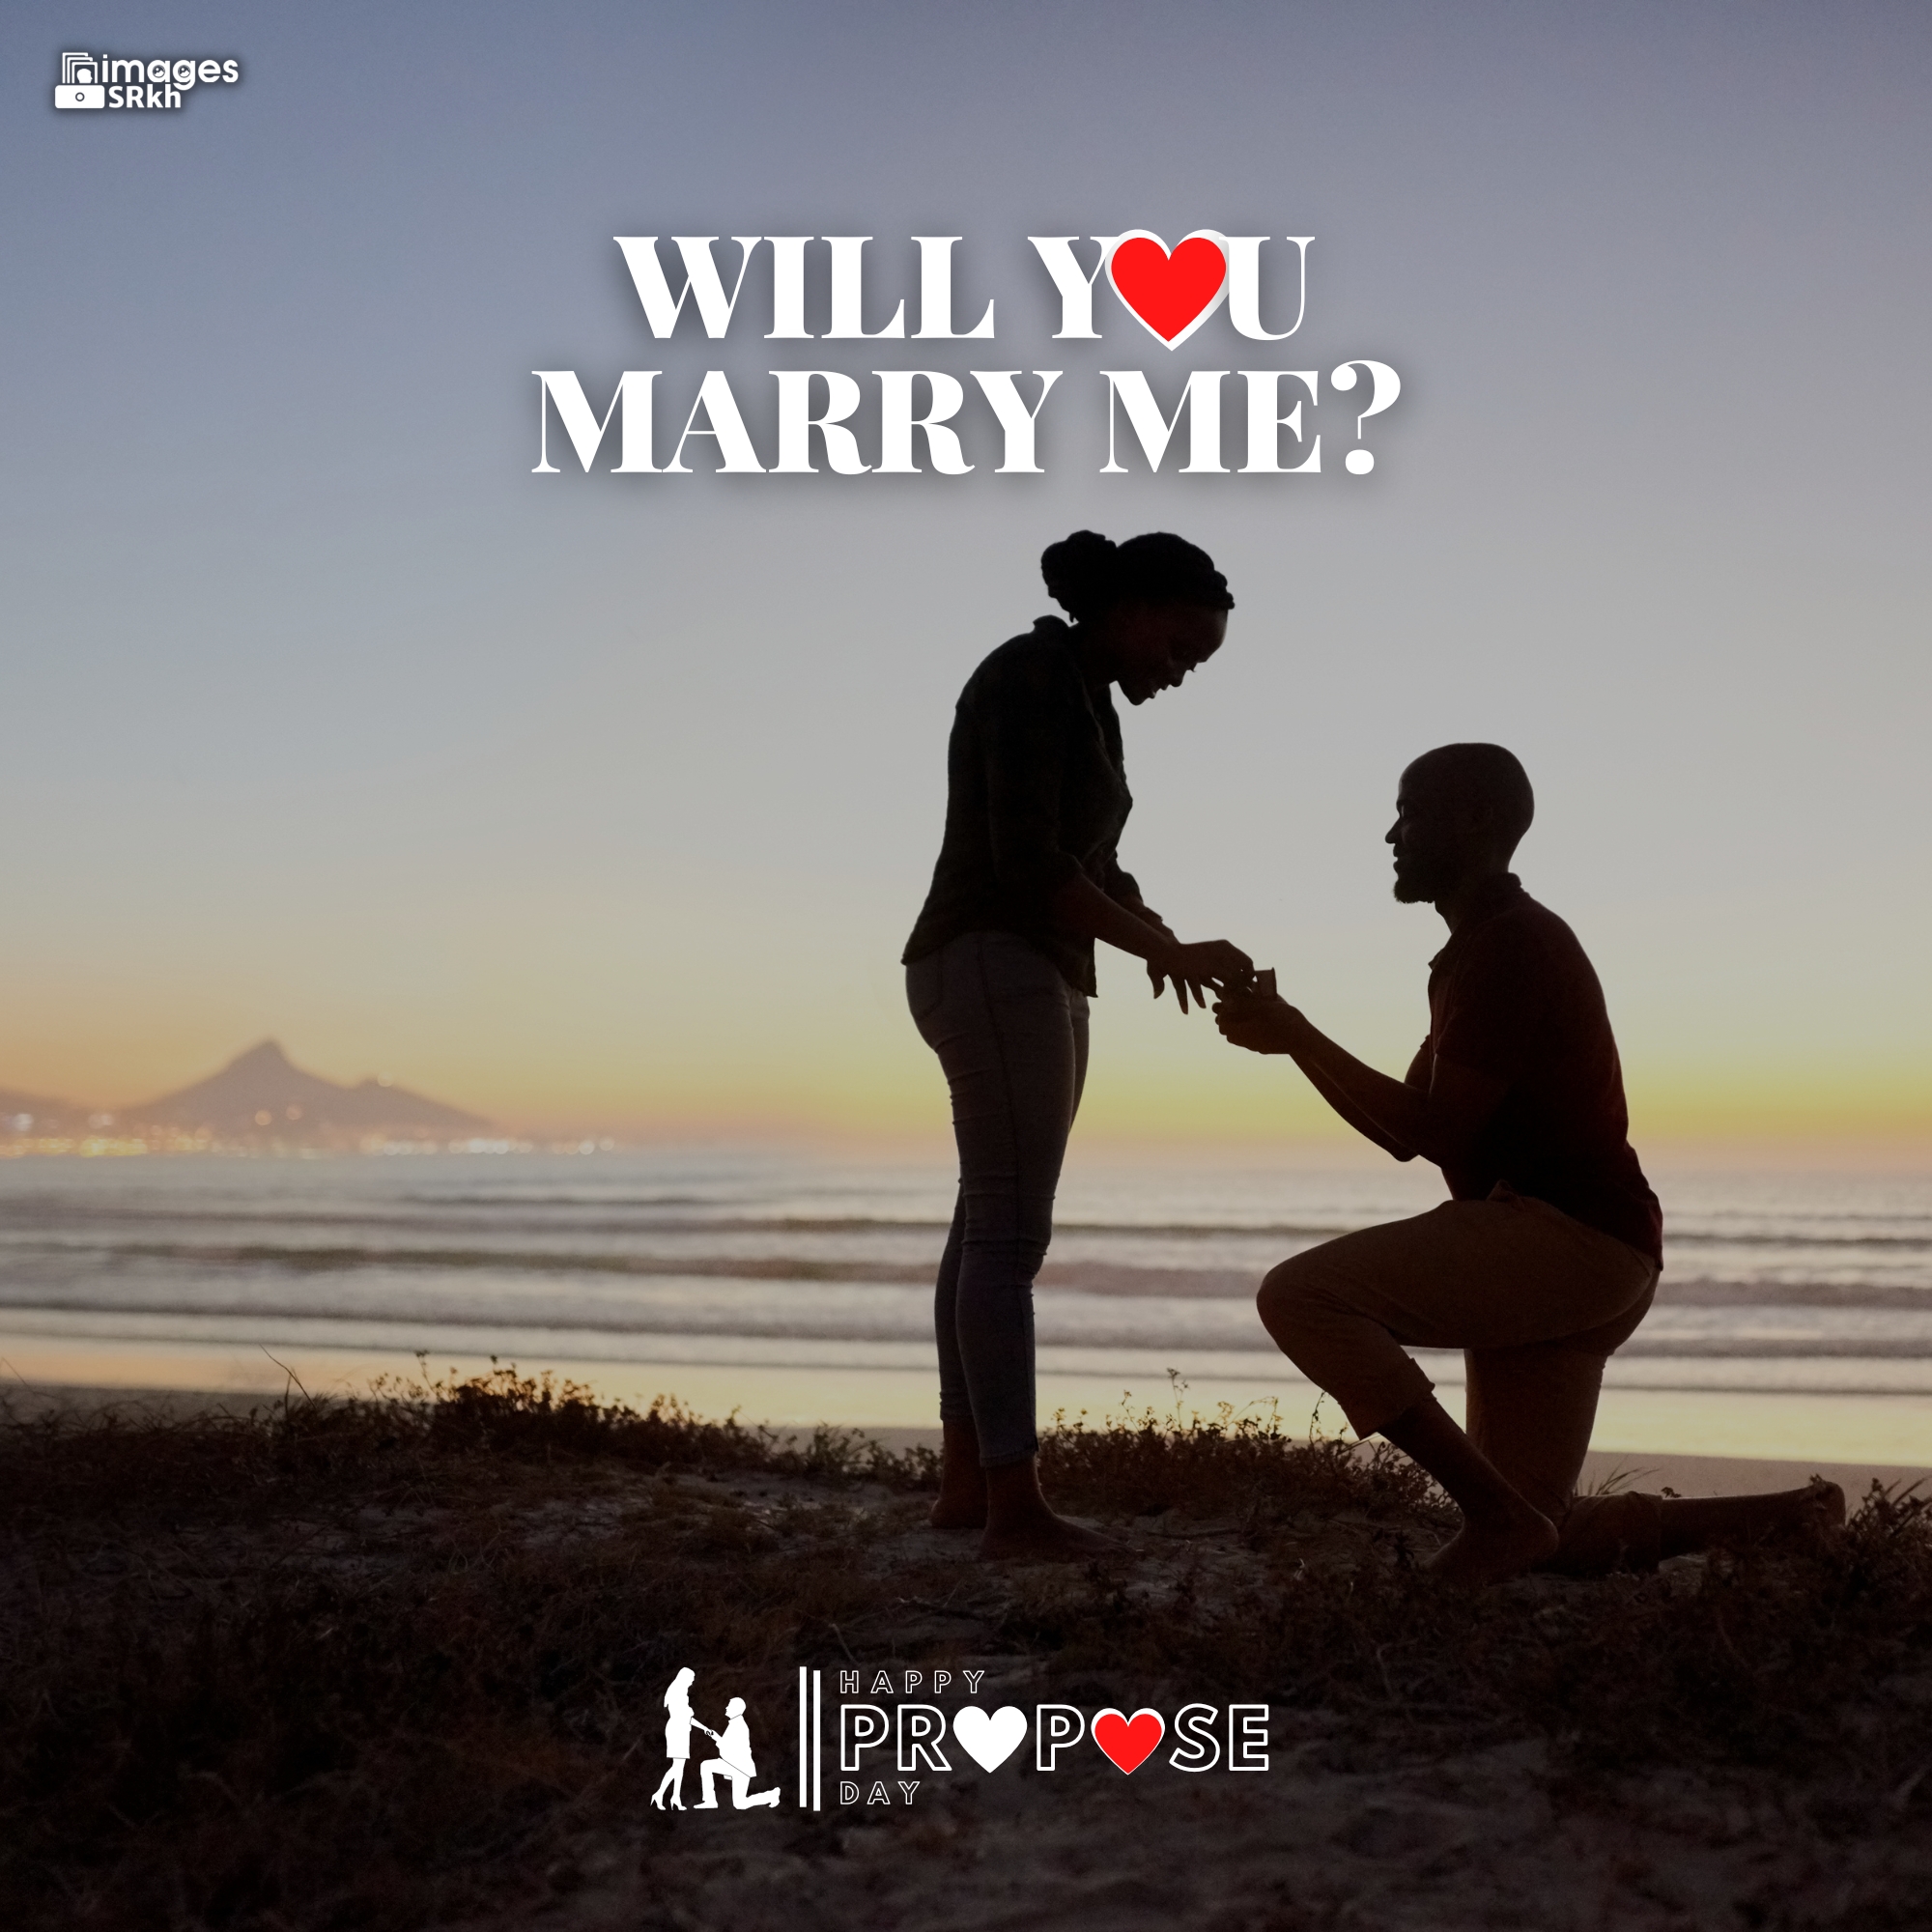 Propose Day Images | 276 | Will You MARRY ME